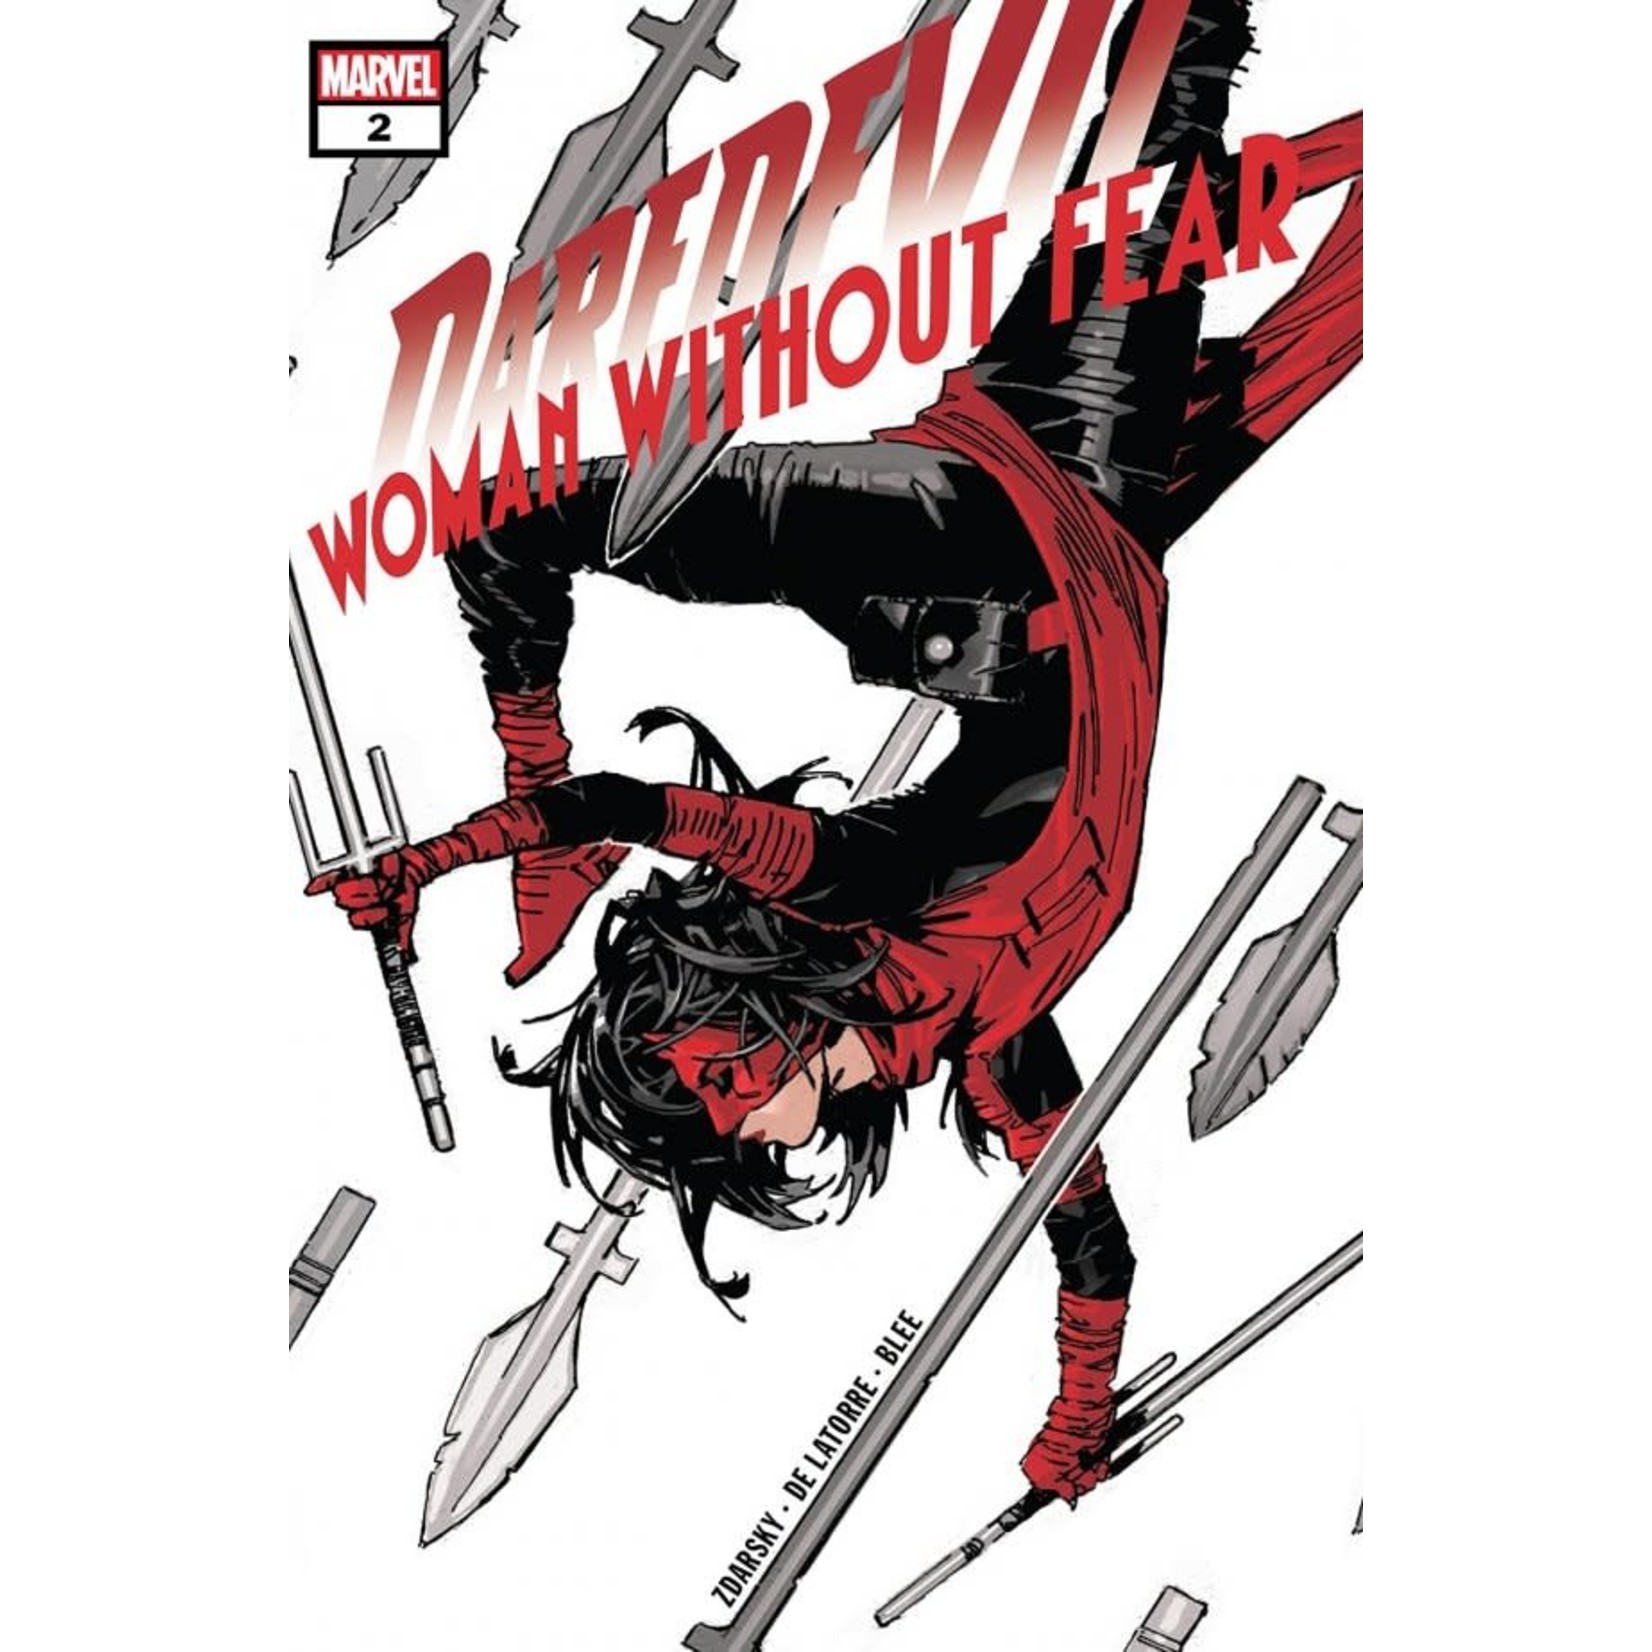 Marvel Daredevil: Woman Without Fear #2